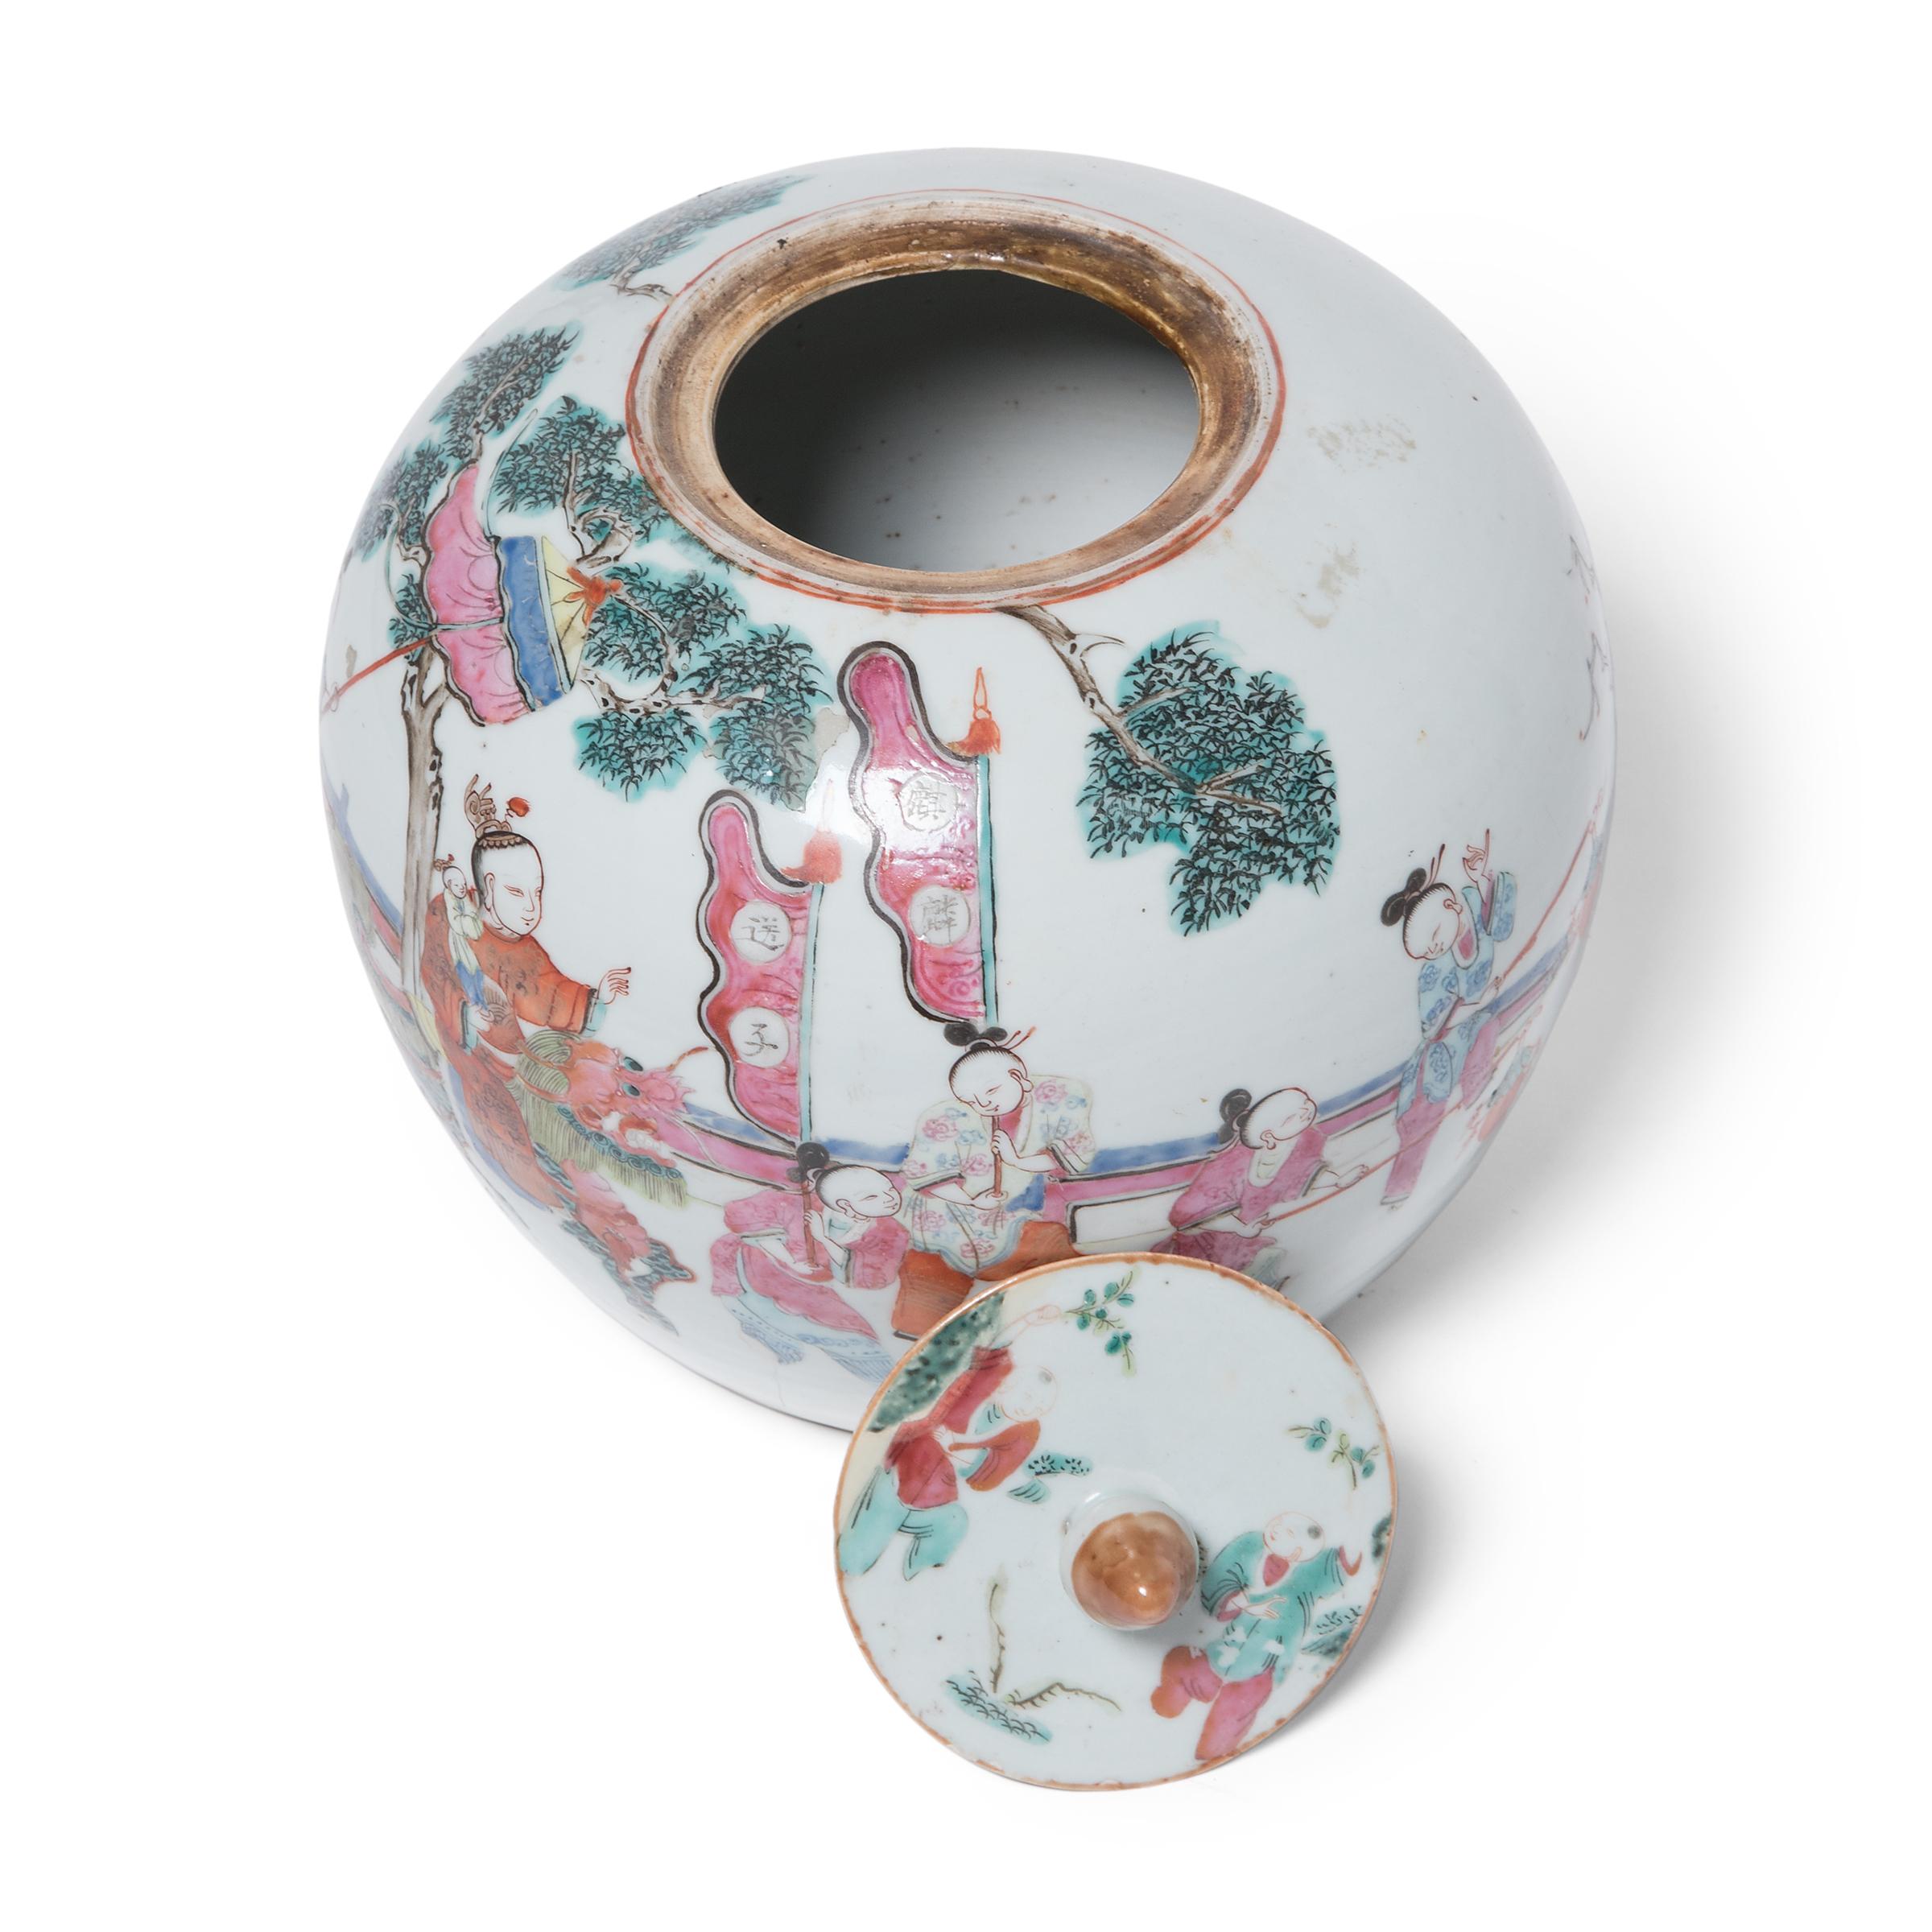 Porcelain Chinese Famille Rose Ginger Jar with Mythical Qilin, C. 1900